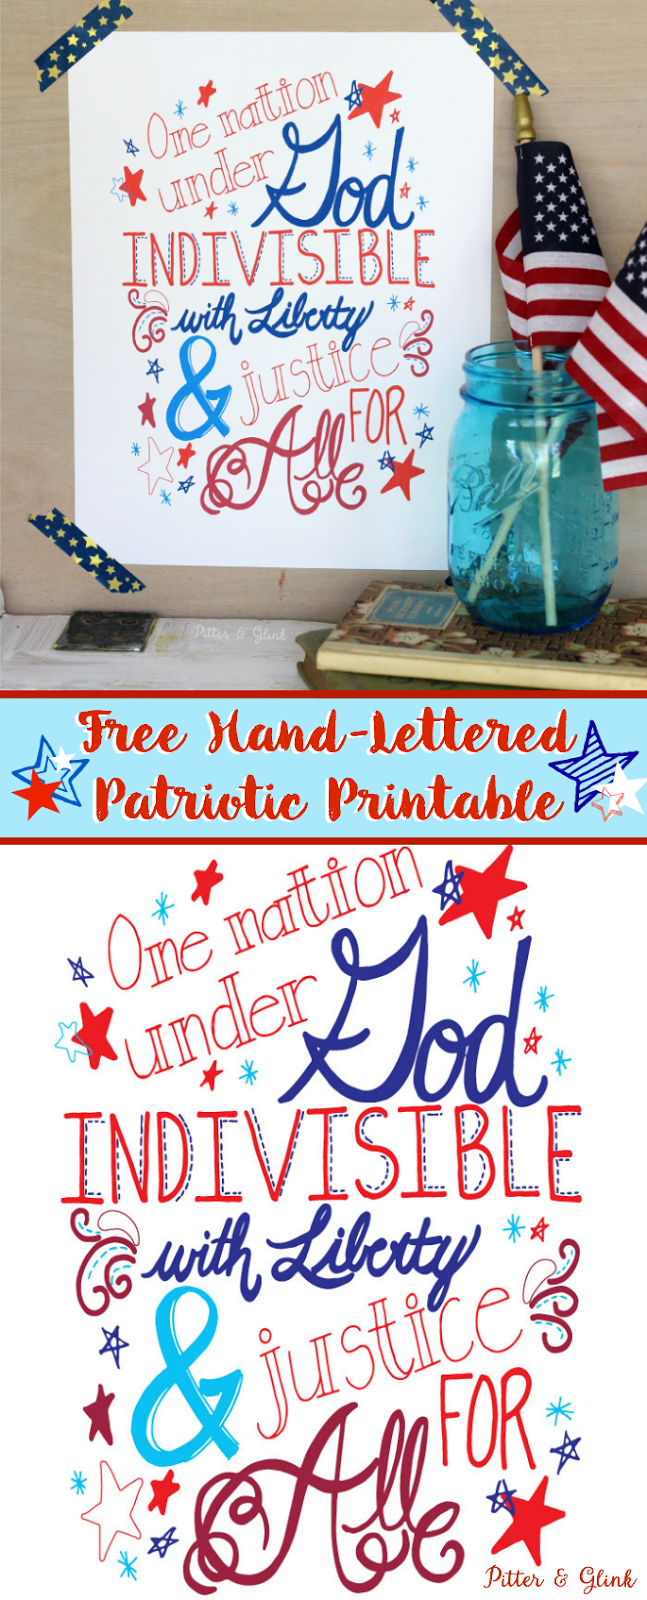 Free Hand-Lettered Patriotic Printable perfect for your Fourth of July decor! www.pitterandglink.com